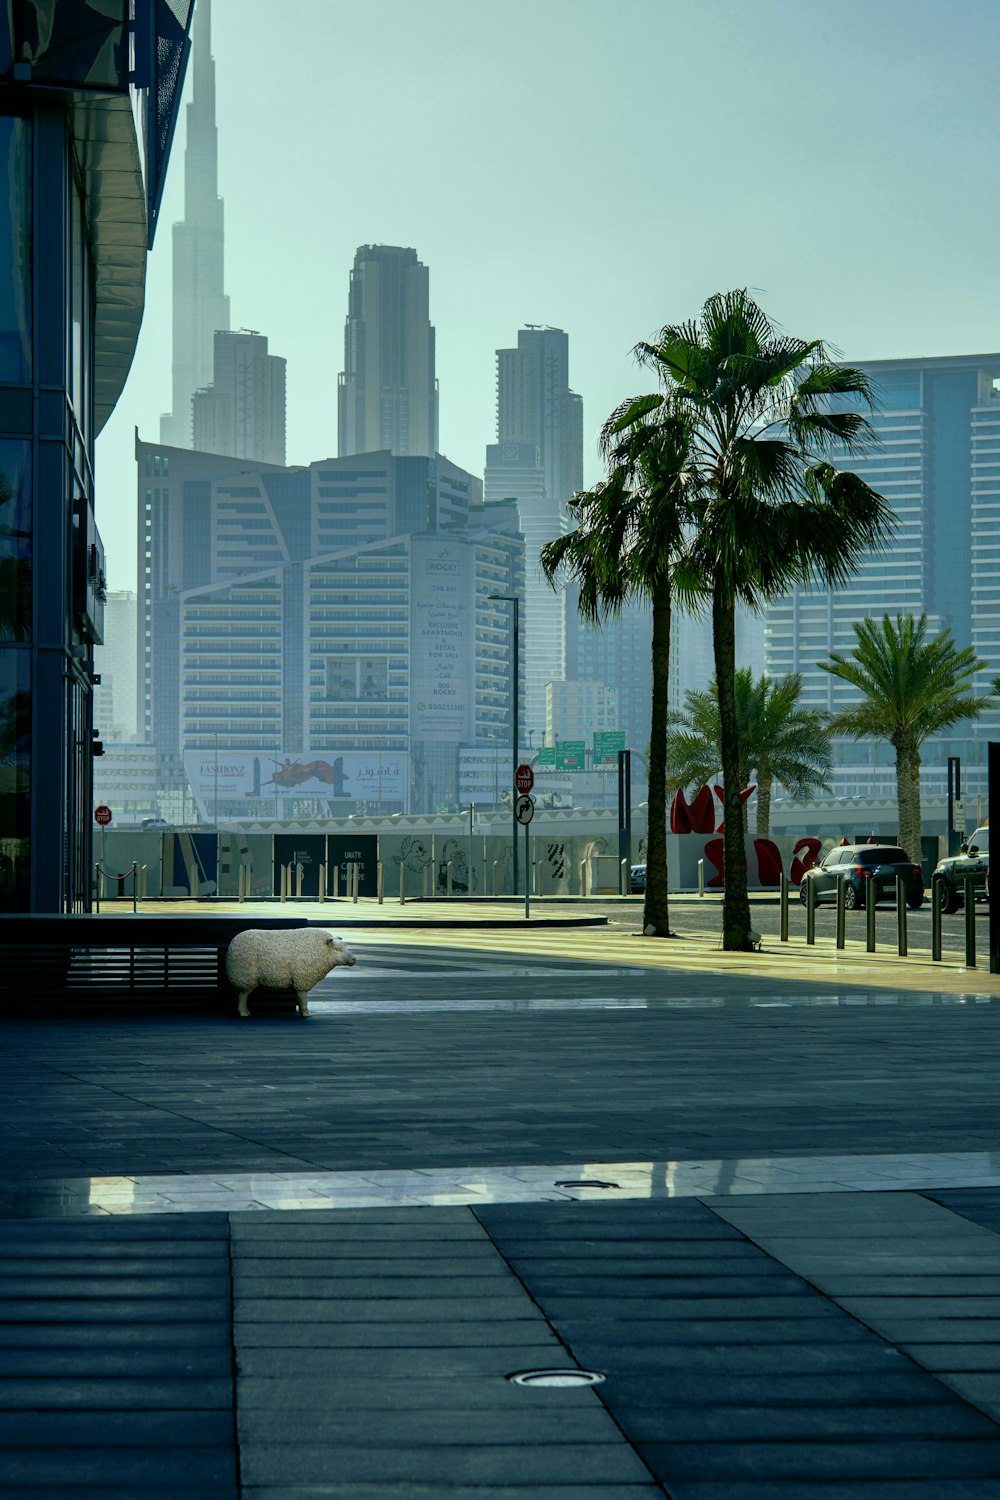 a city street with palm trees and buildings in the background